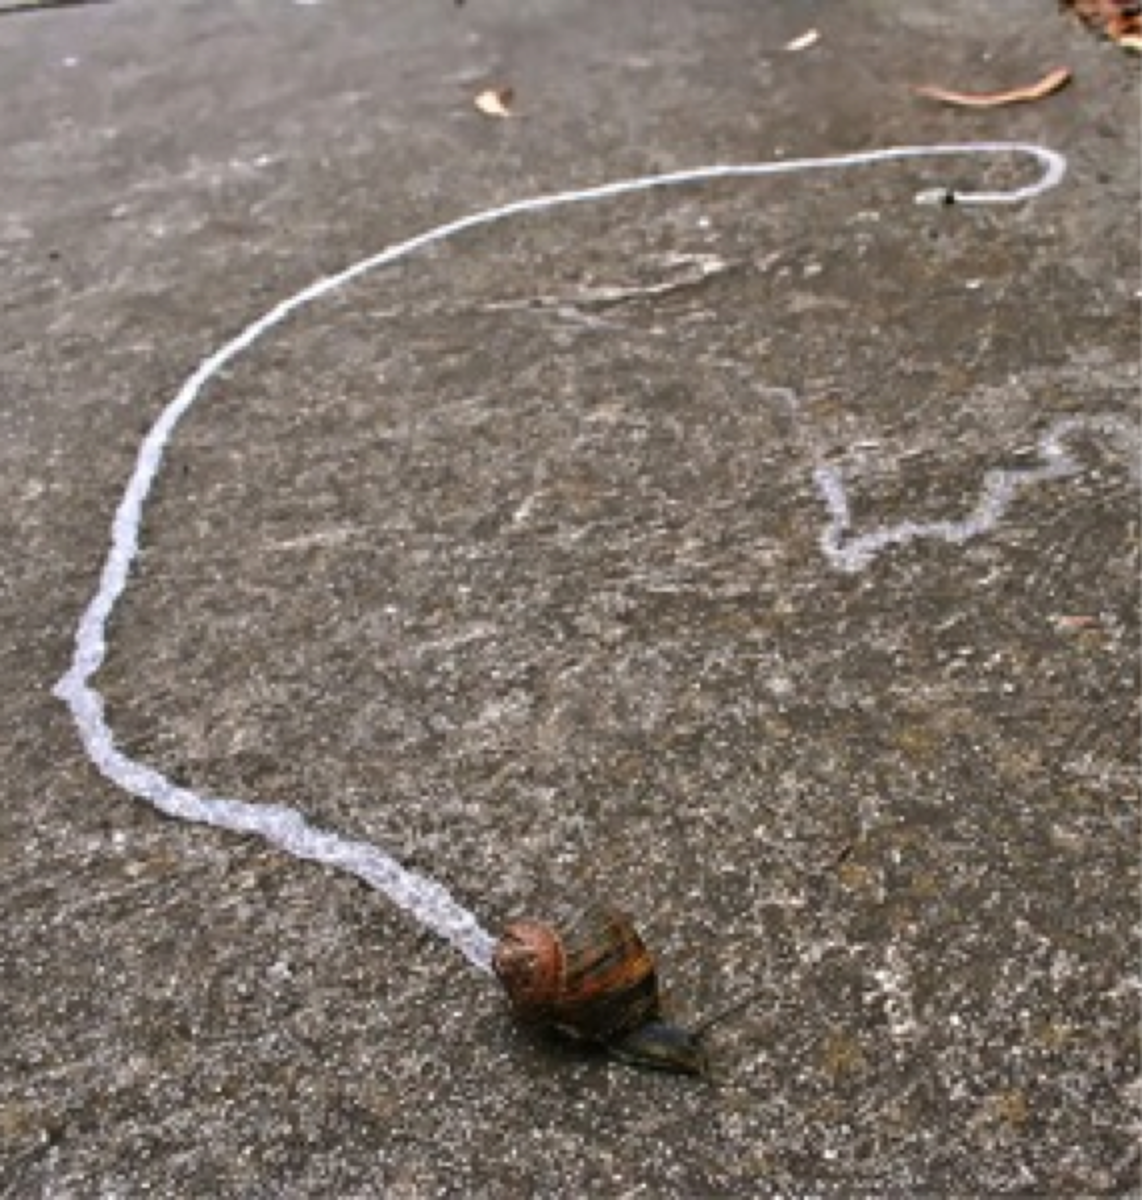 If you spot a snail trail, follow it and you'll most likely find the snail that made it.